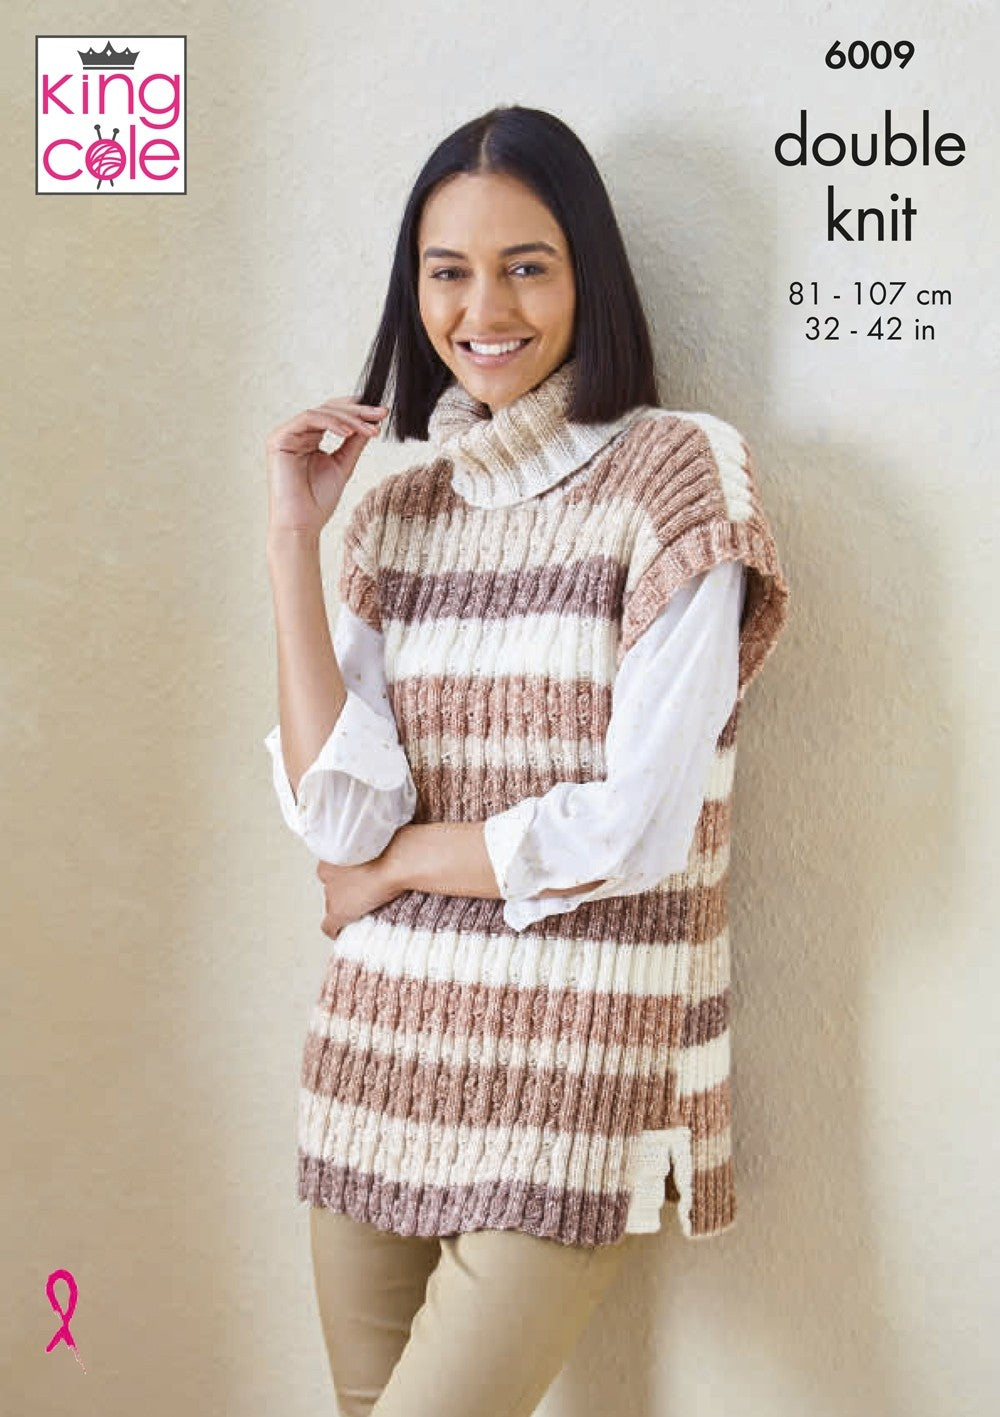 King Cole HARVEST KNITTING PATTERNS - 6009 Hoodie and Pullover